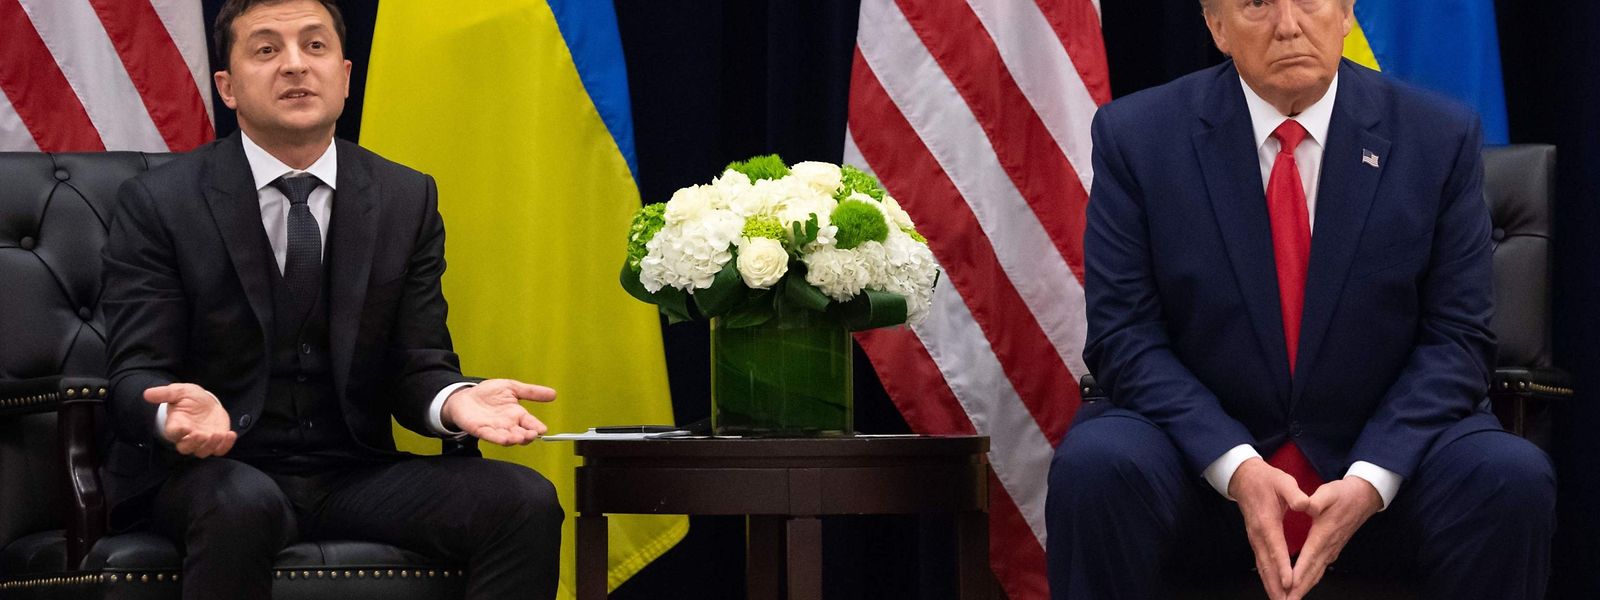 US President Donald Trump and Ukrainian President Volodymyr Zelensky meet in New York on September 25, 2019, on the sidelines of the United Nations General Assembly. (Photo by SAUL LOEB / AFP)